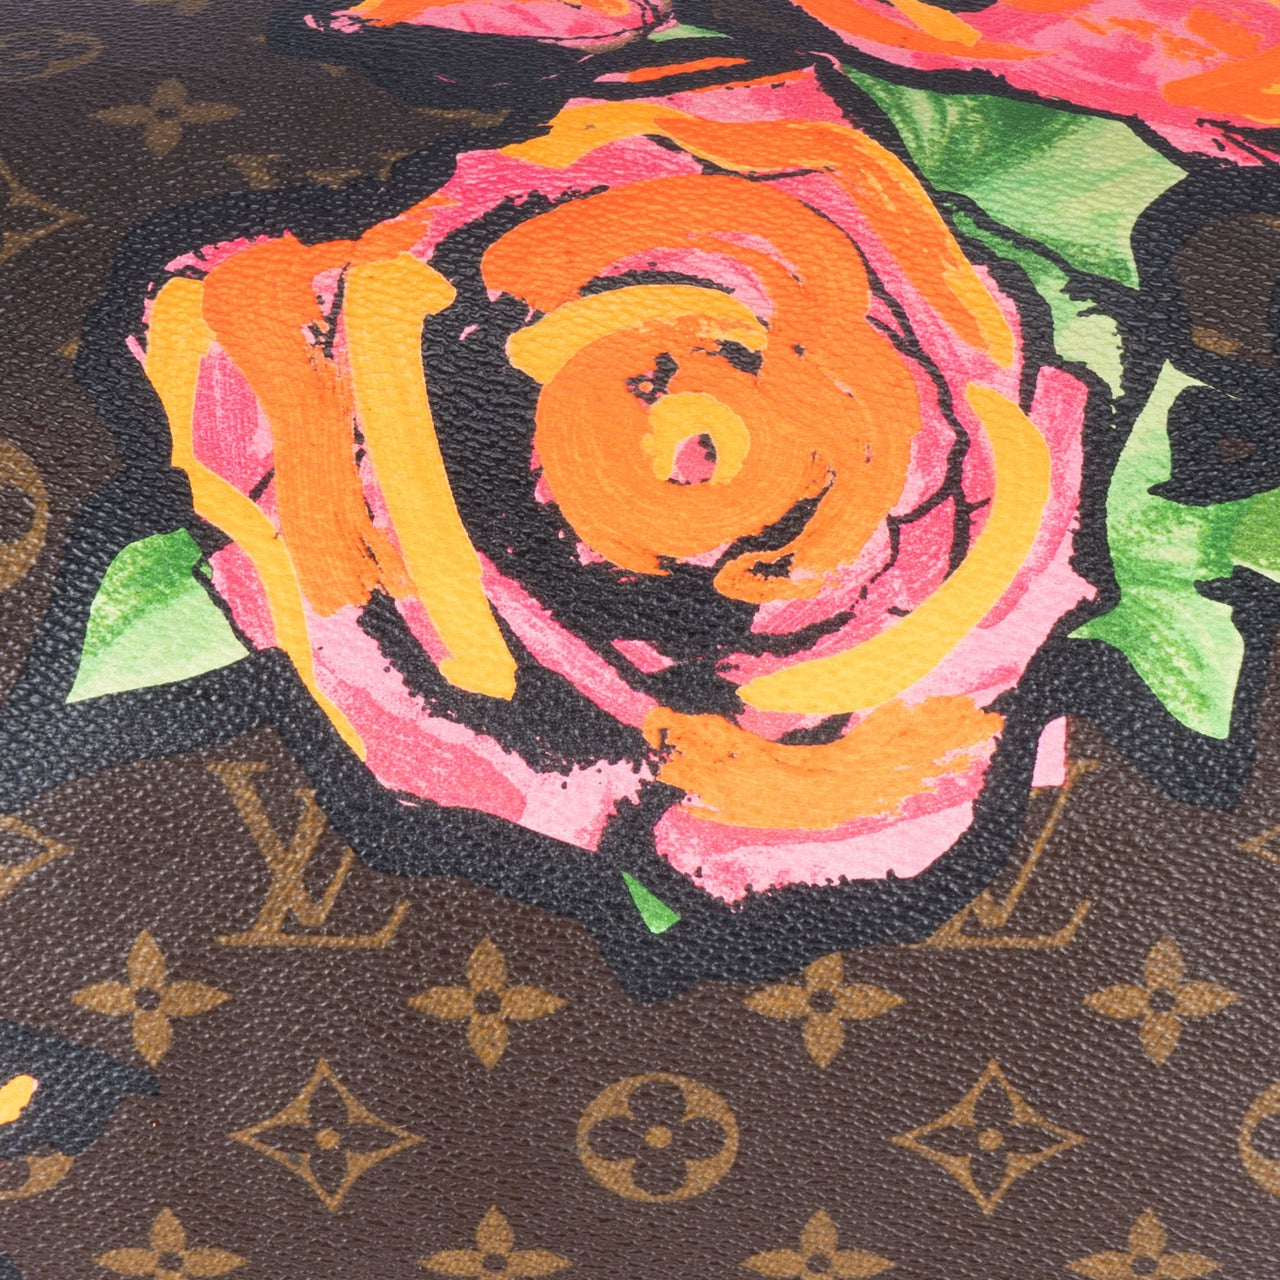 Louis Vuitton Canvas Monogram Roses by Stephen Sprouse 30 Speedy Bag